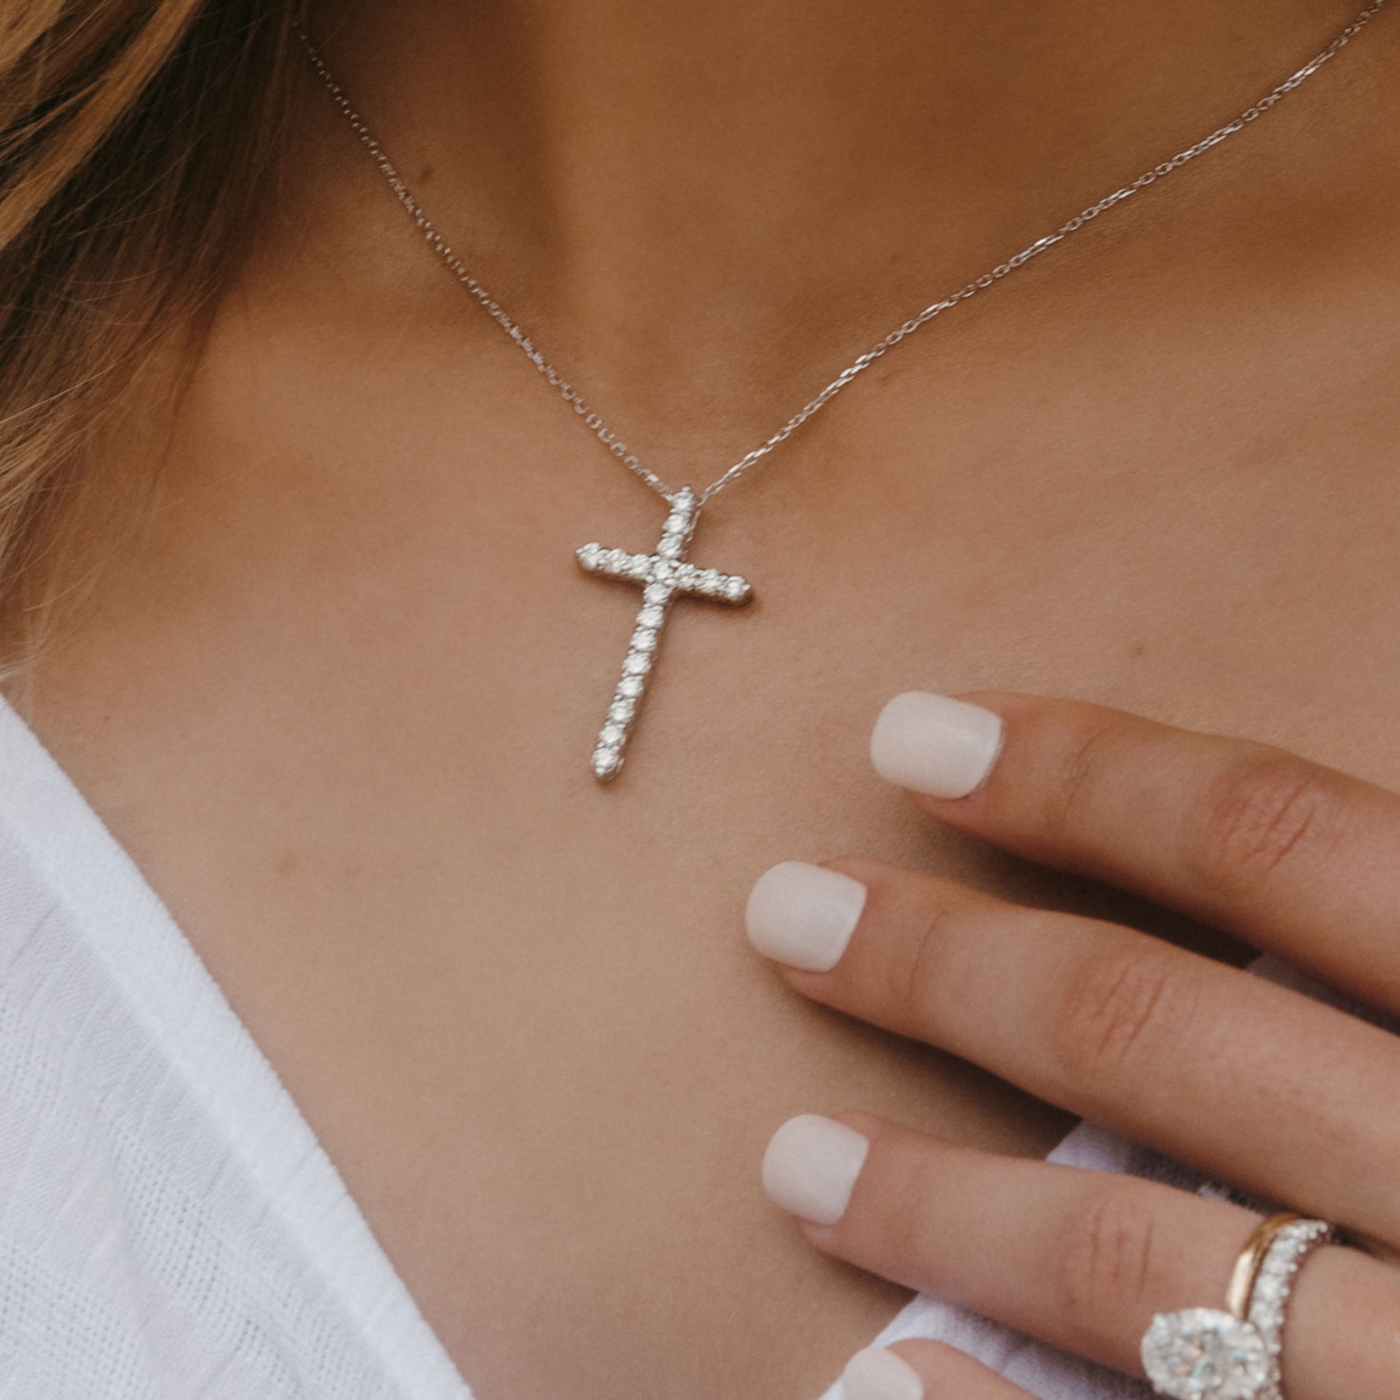 The Traditional Cross Pendant